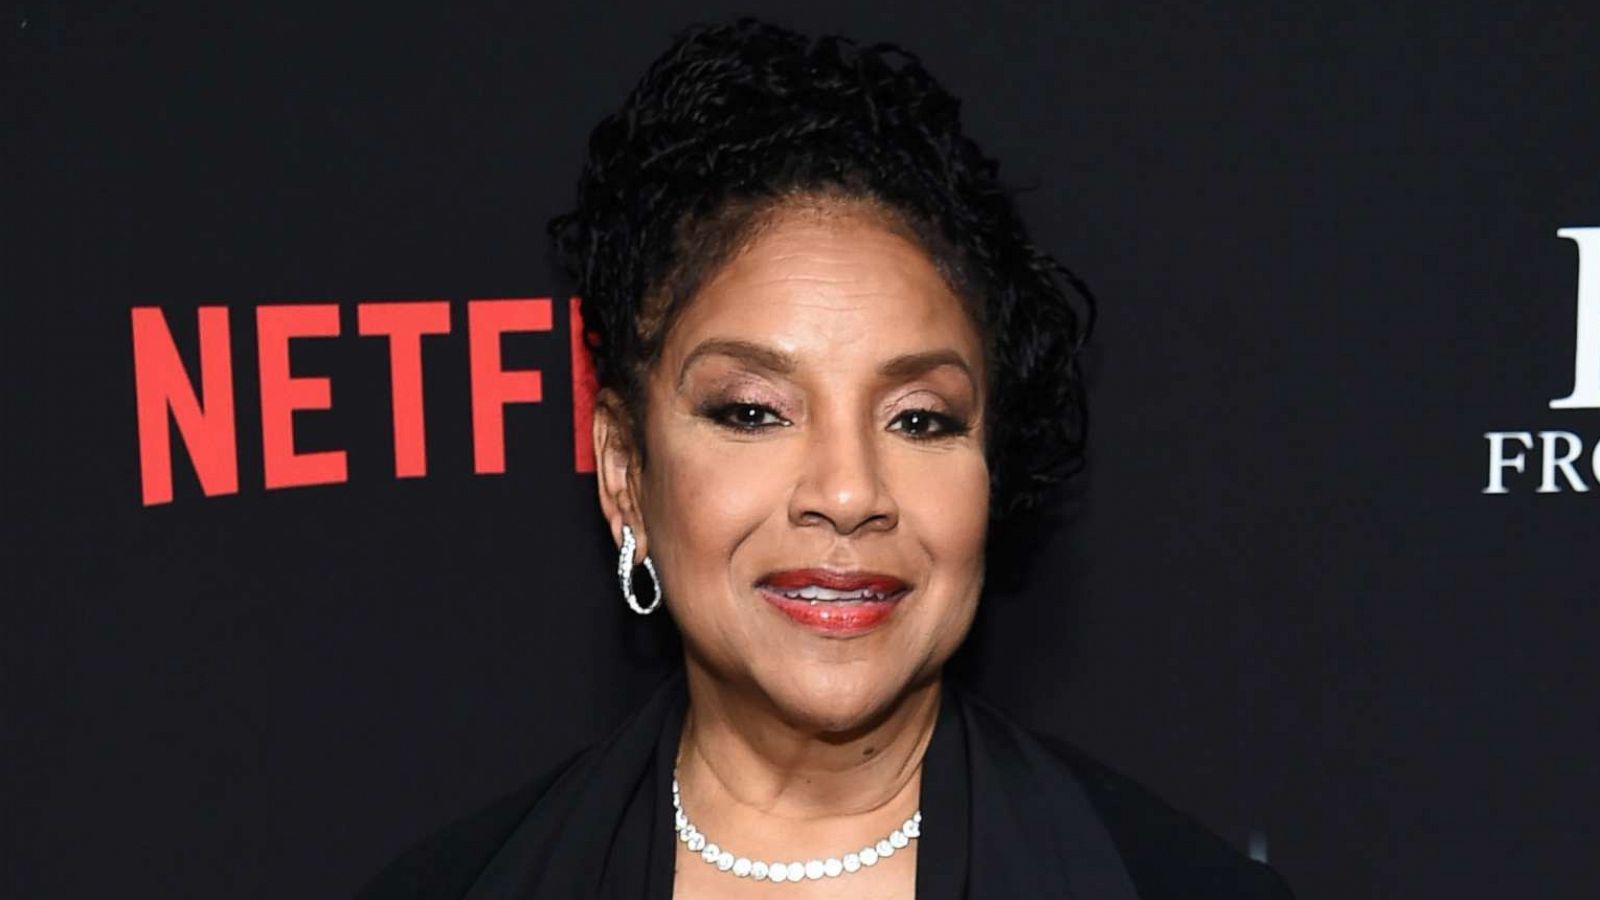 PHOTO: Phylicia Rashad attends the premiere of Tyler Perry's "A Fall From Grace" at Metrograph, Jan. 13, 2020, in New York City.